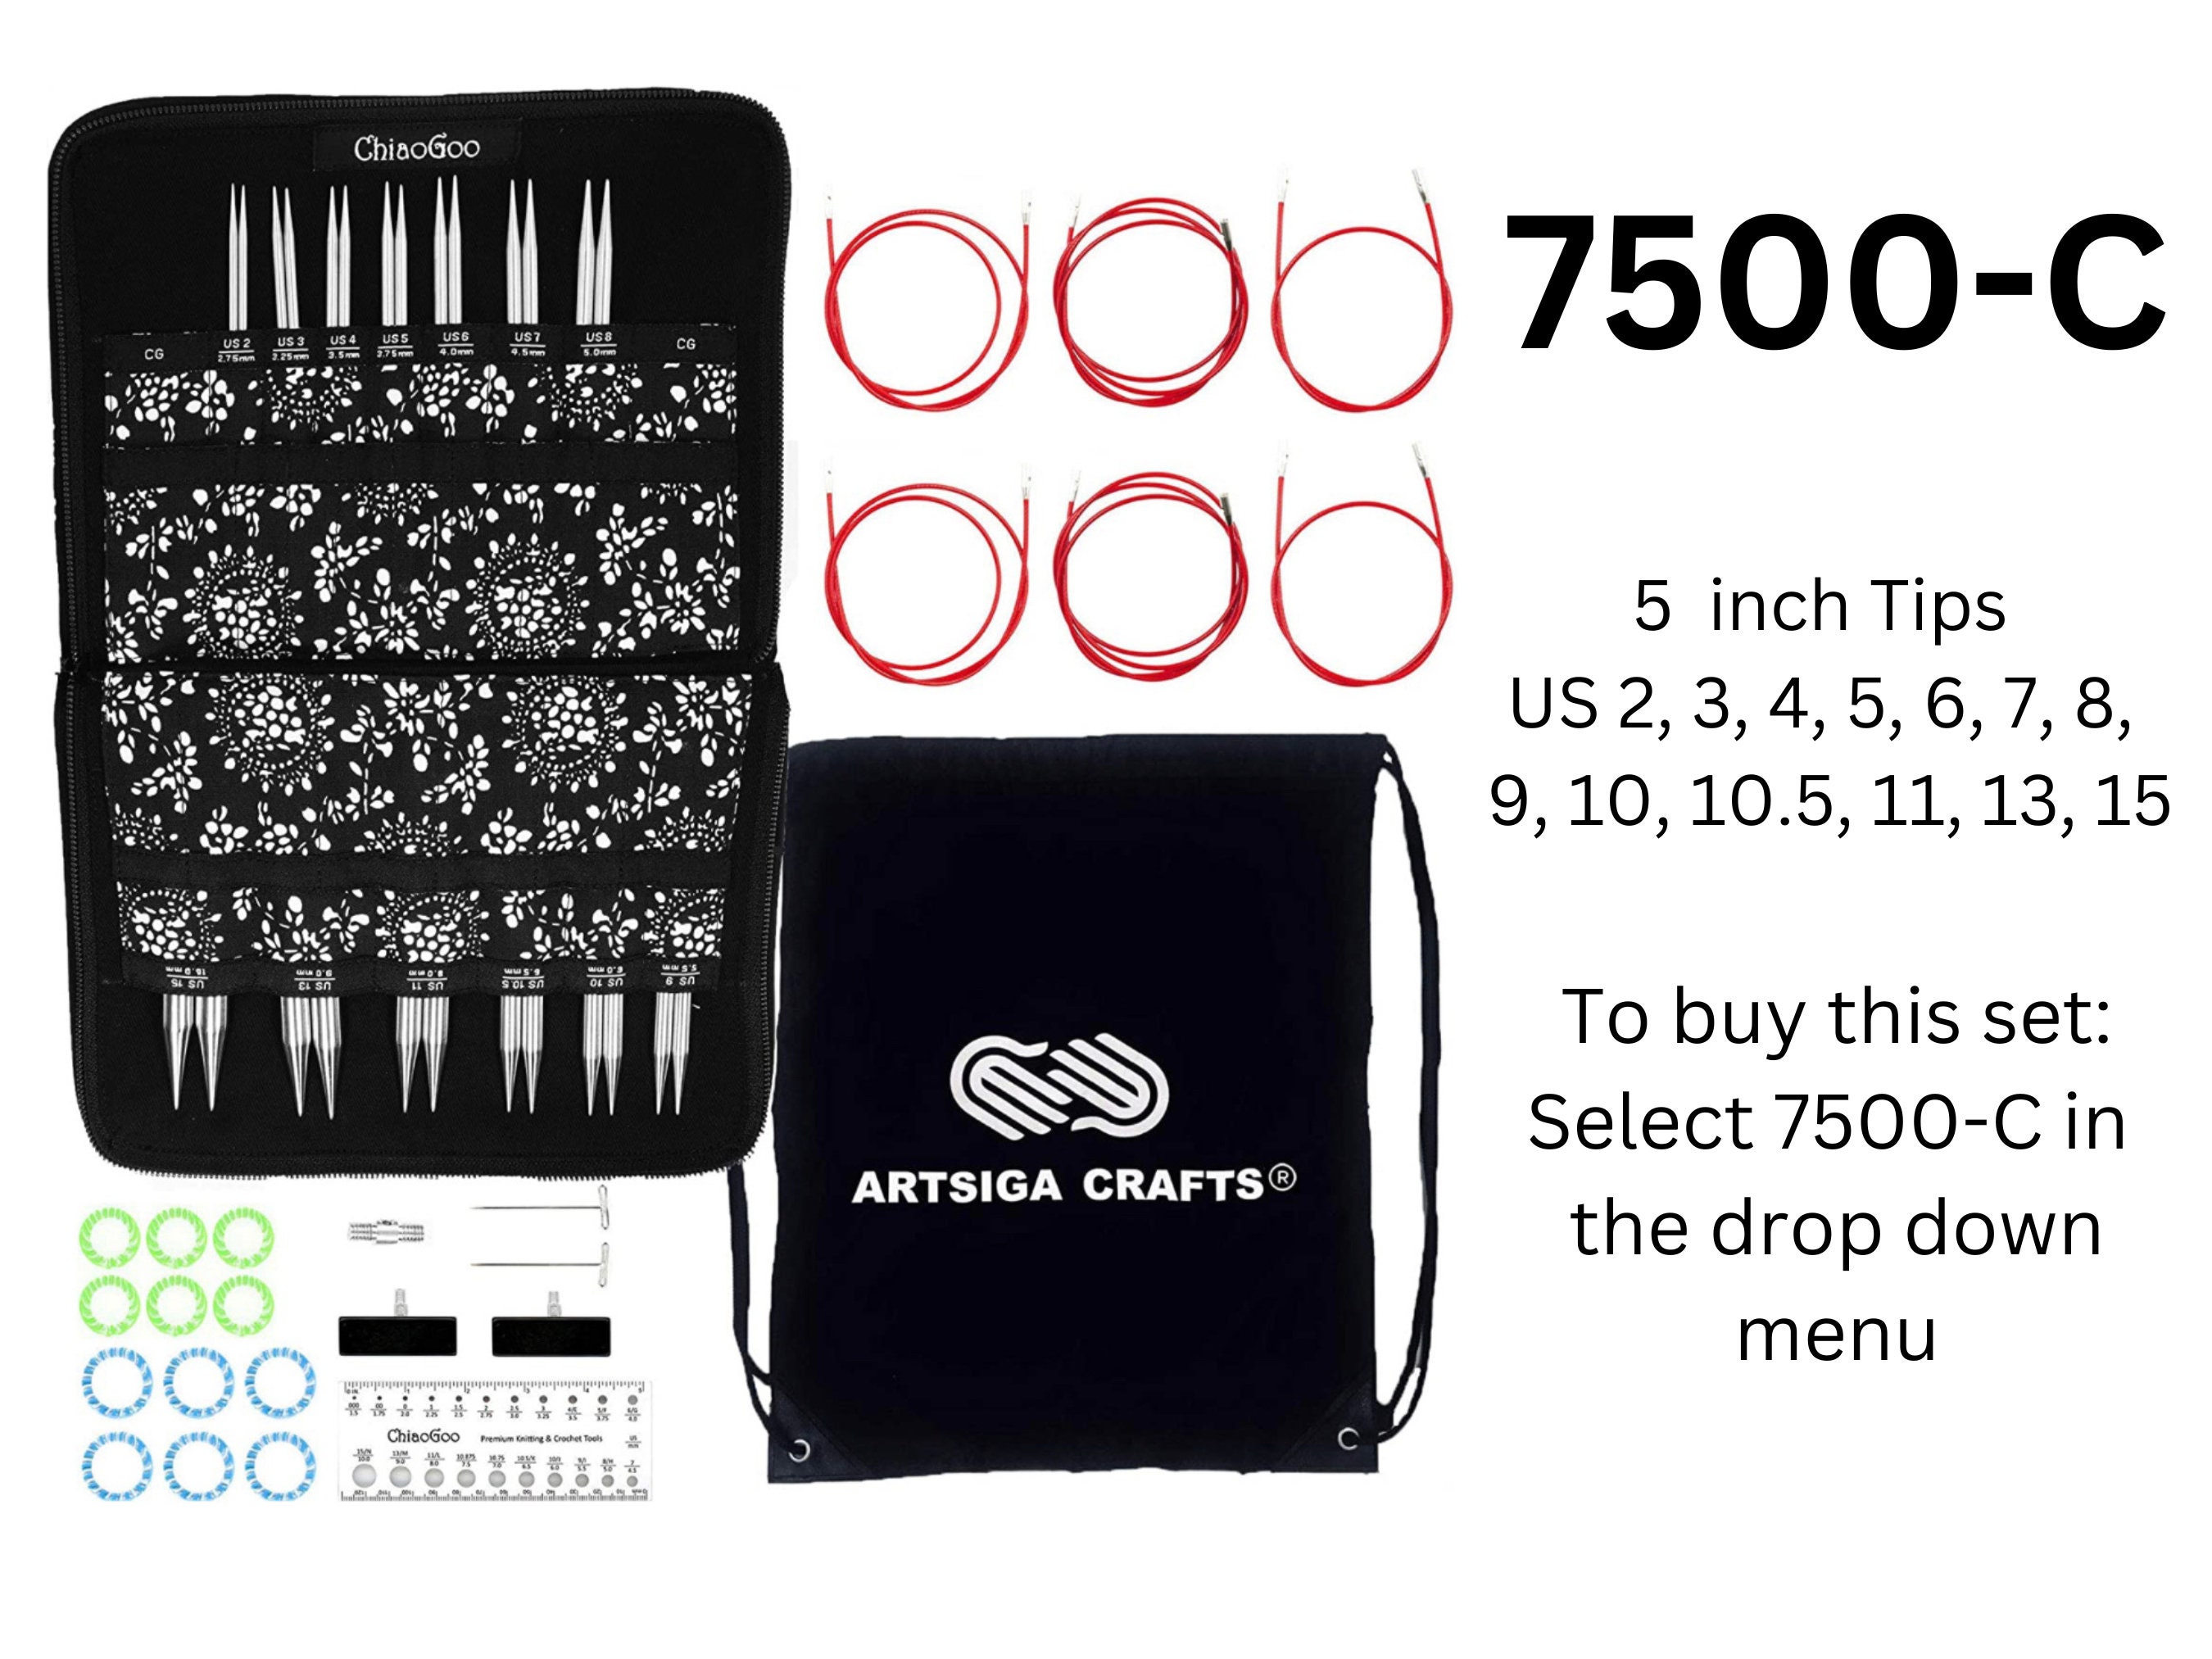 addi Click Turbo Basic 5-Inch Interchangeable Circular Knitting Needle Set  Sizes US 4, 5, 6, 7, 8, 9, 10, 11, 13 and 15 with 3 Blue Cords, Black